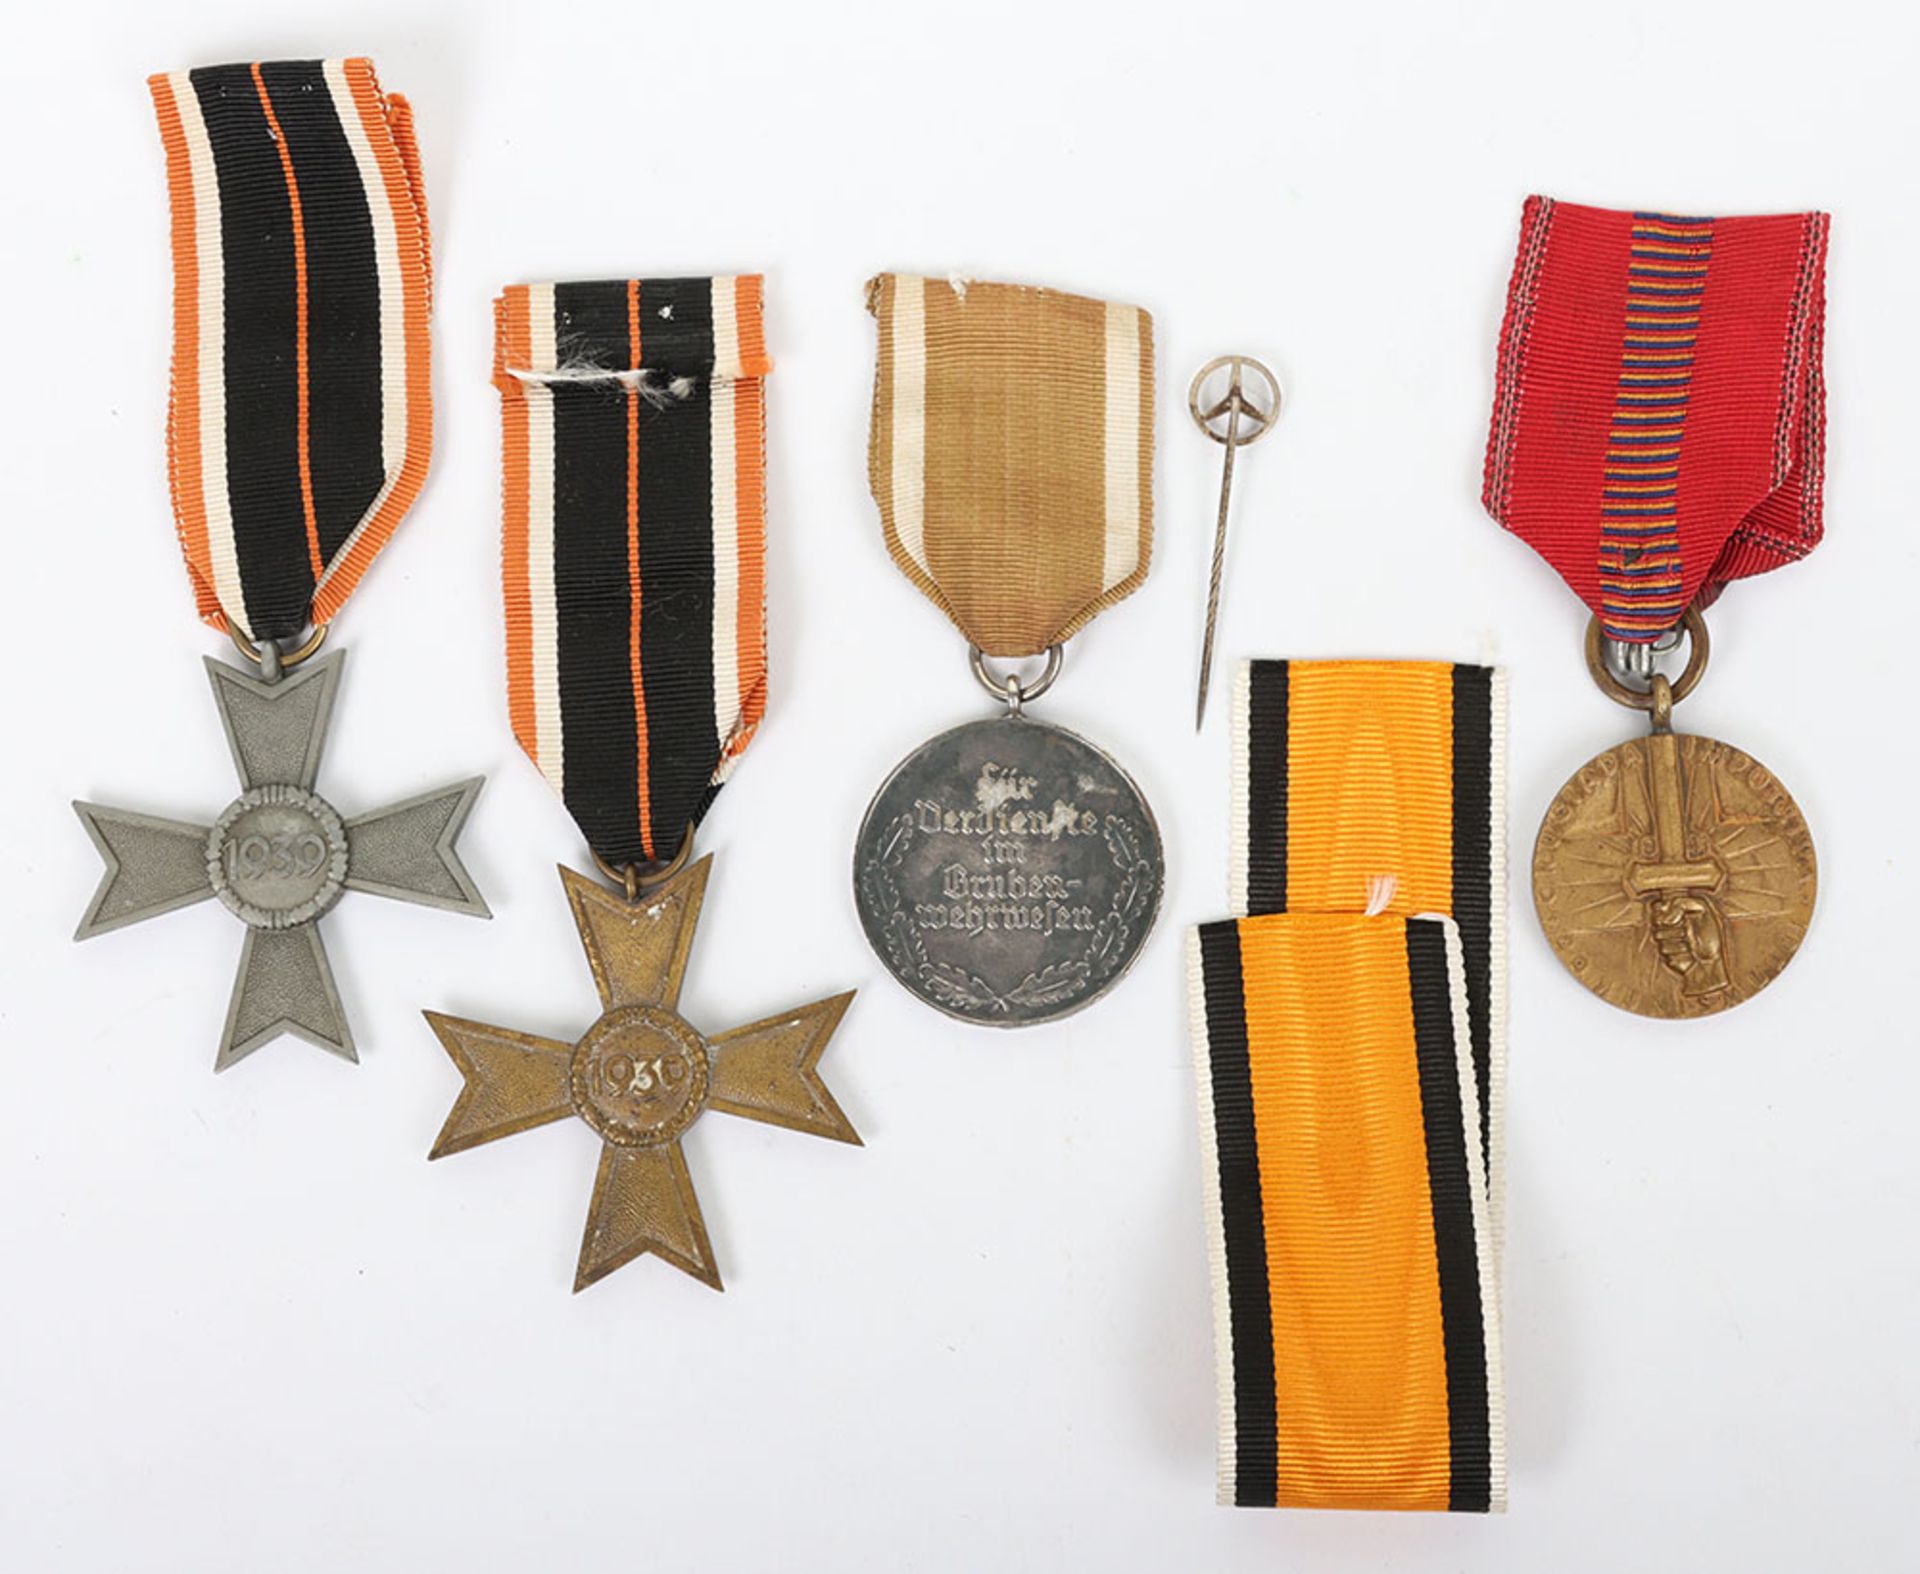 WW2 German War Service Cross 2nd class Without Swords - Image 3 of 3